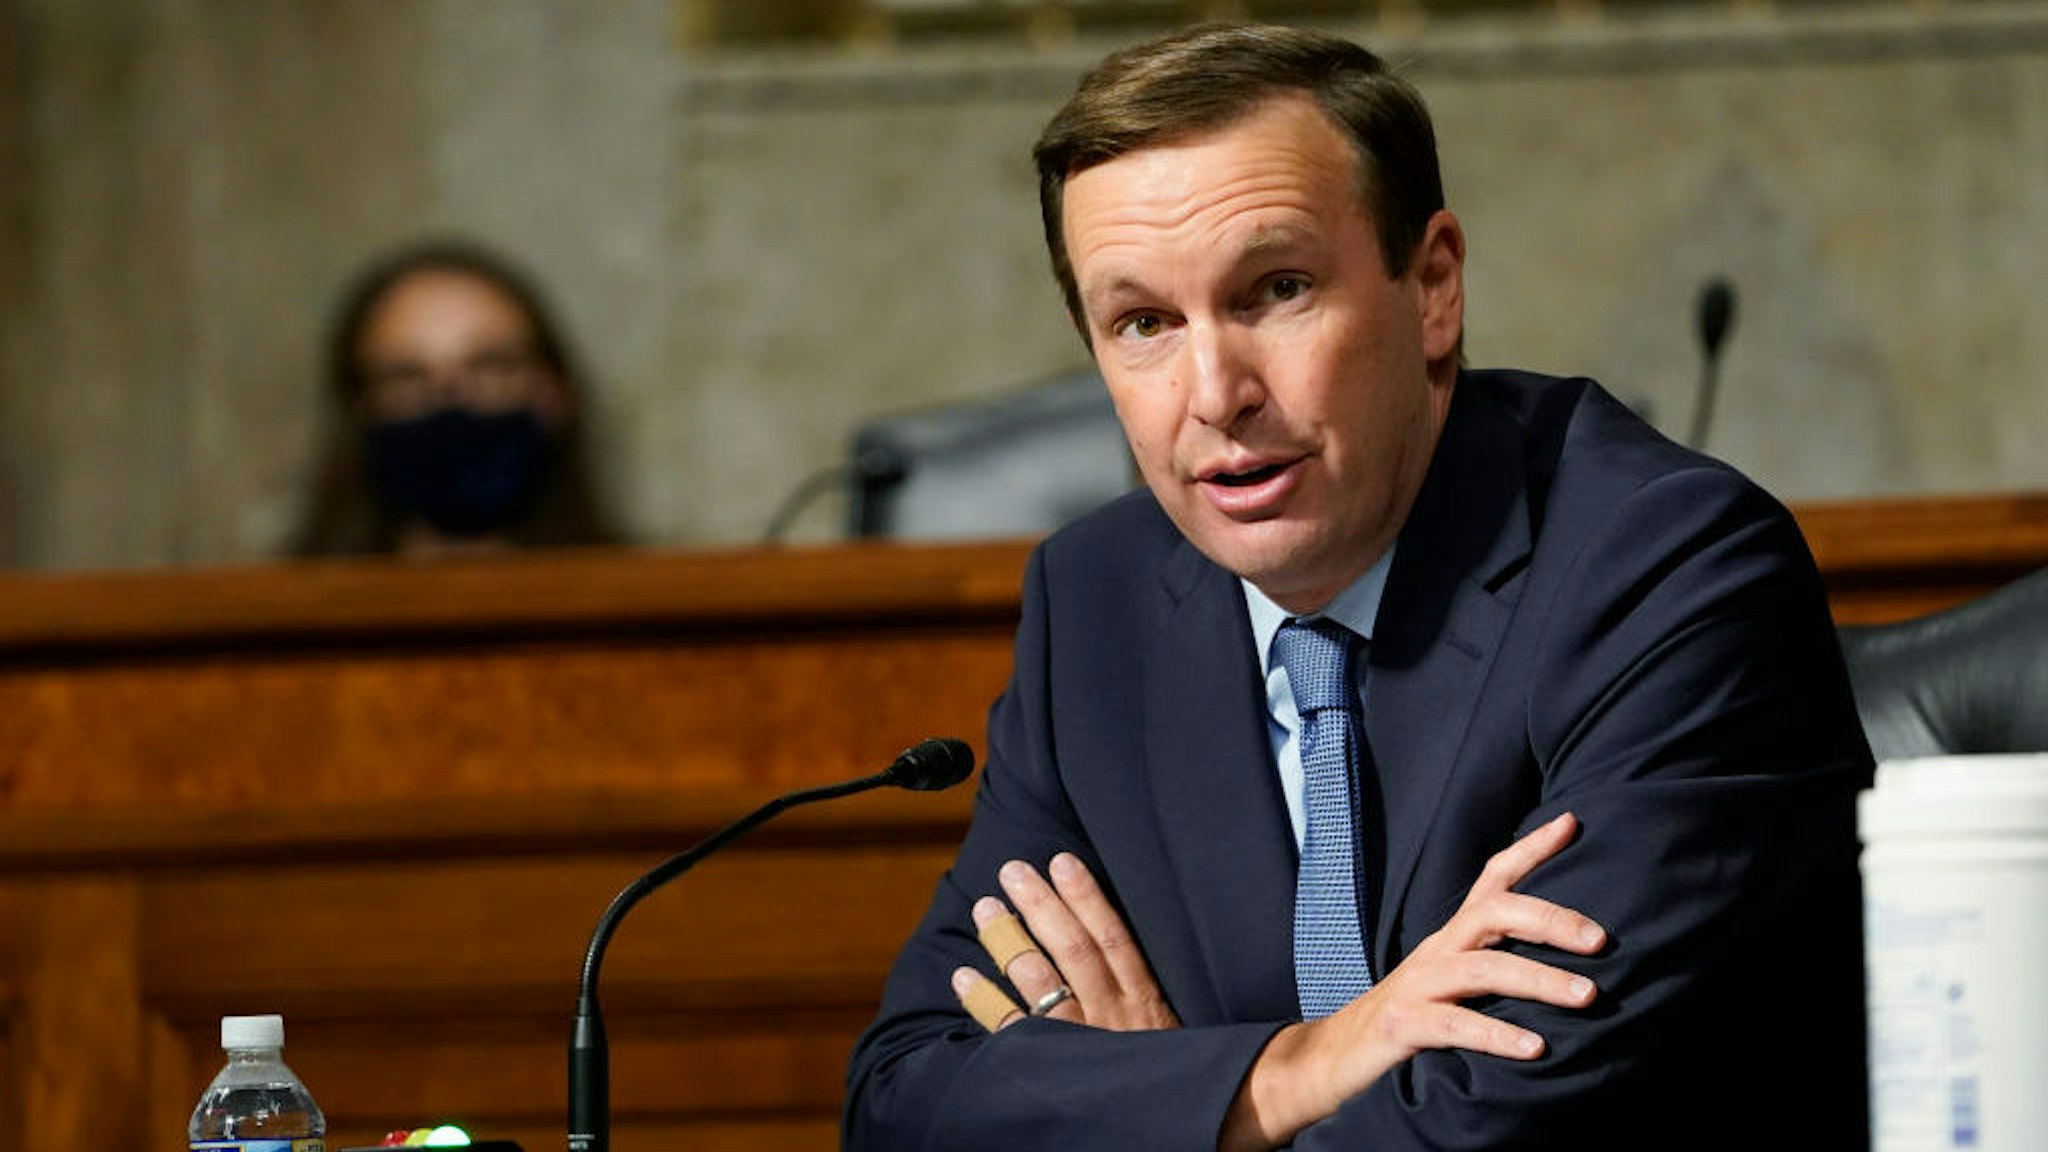 Sen. Chris Murphy, D-Conn., speaks during a Senate Foreign Relations Committee hearing on Capitol Hill in Washington, Thursday, Sept. 24, 2020, on U.S. policy in a changing Middle East. (AP Photo/Susan Walsh, Pool)